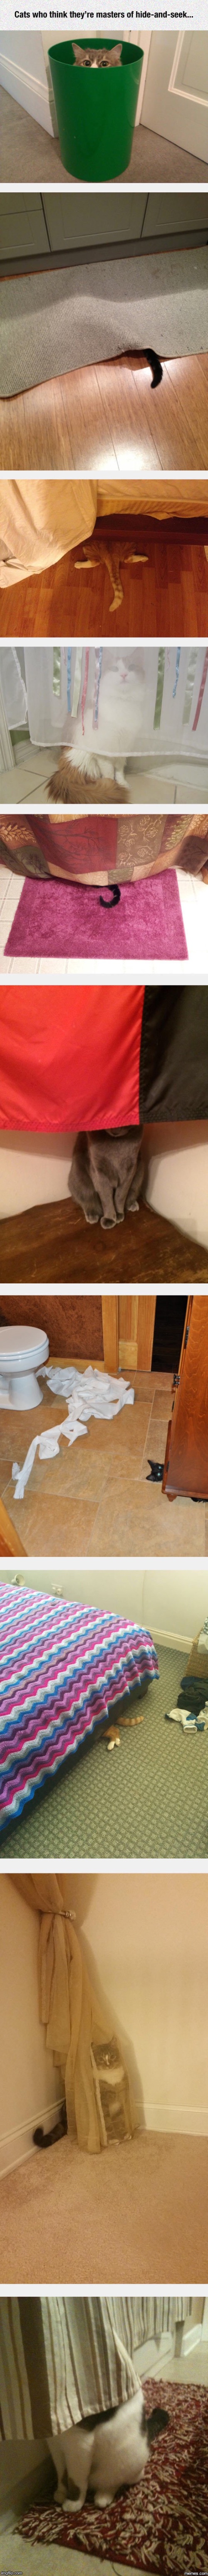 And now, a moment with cats who think they are masters at hide-and-seek | image tagged in cats,memes | made w/ Imgflip meme maker